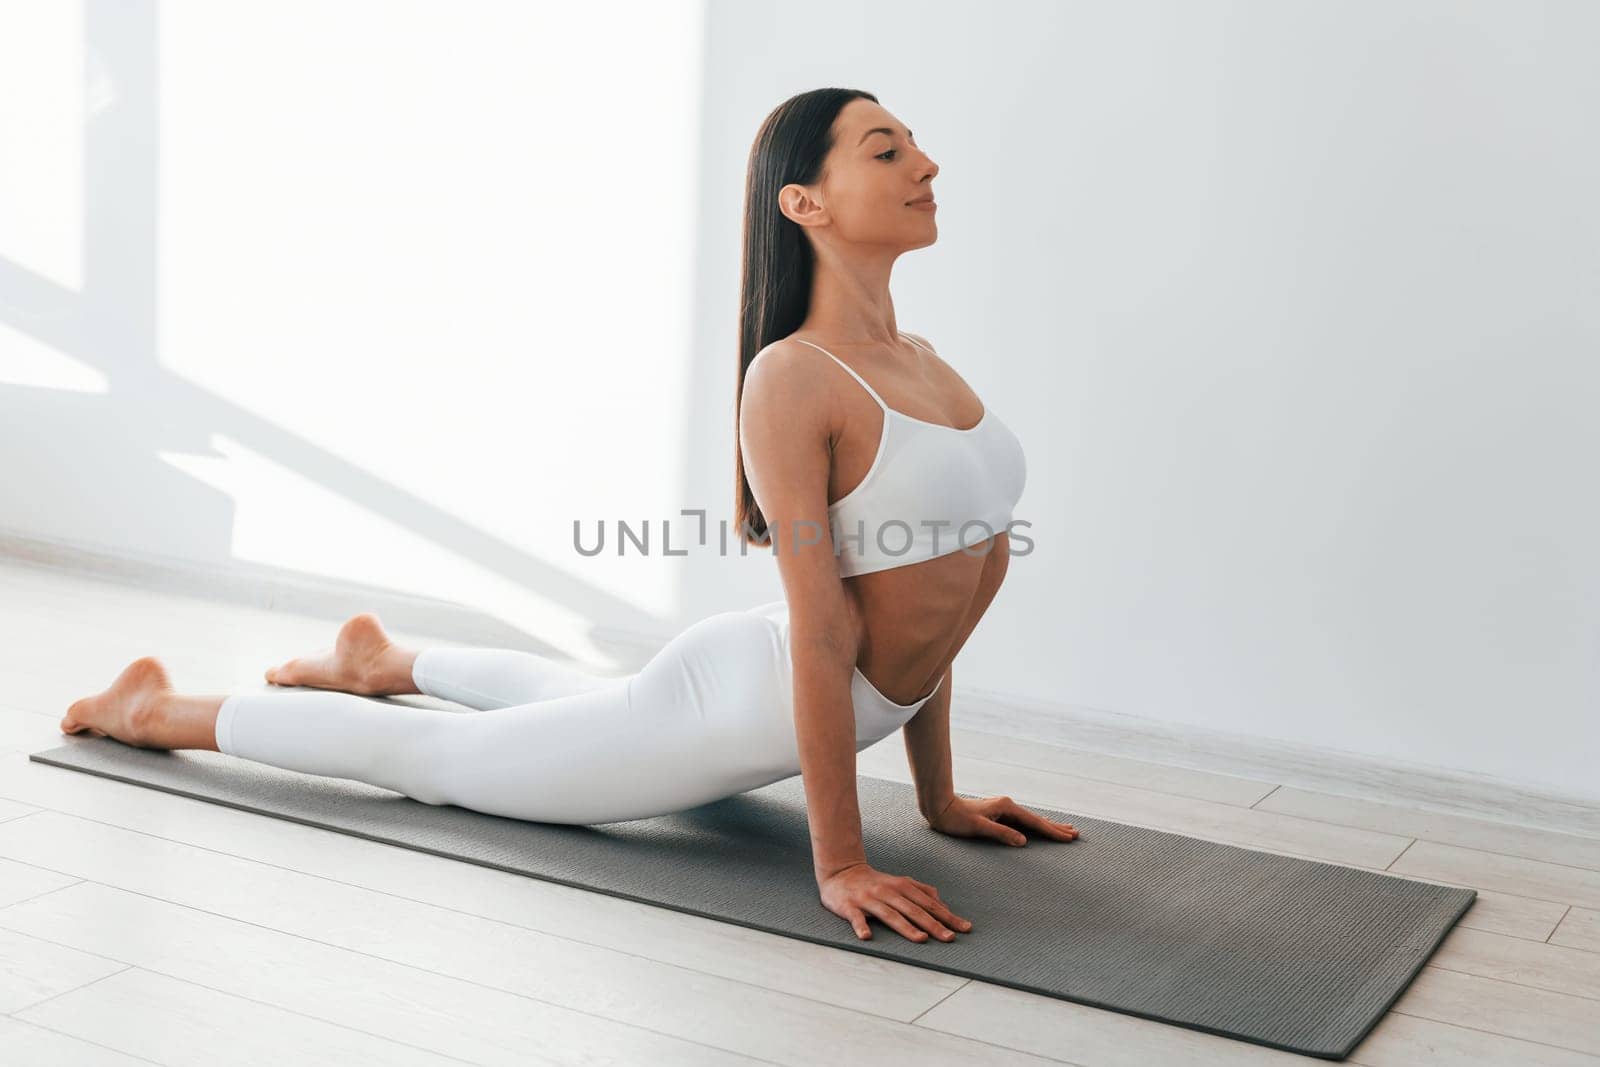 Doing exercises. Young caucasian woman with slim body shape is indoors at daytime.